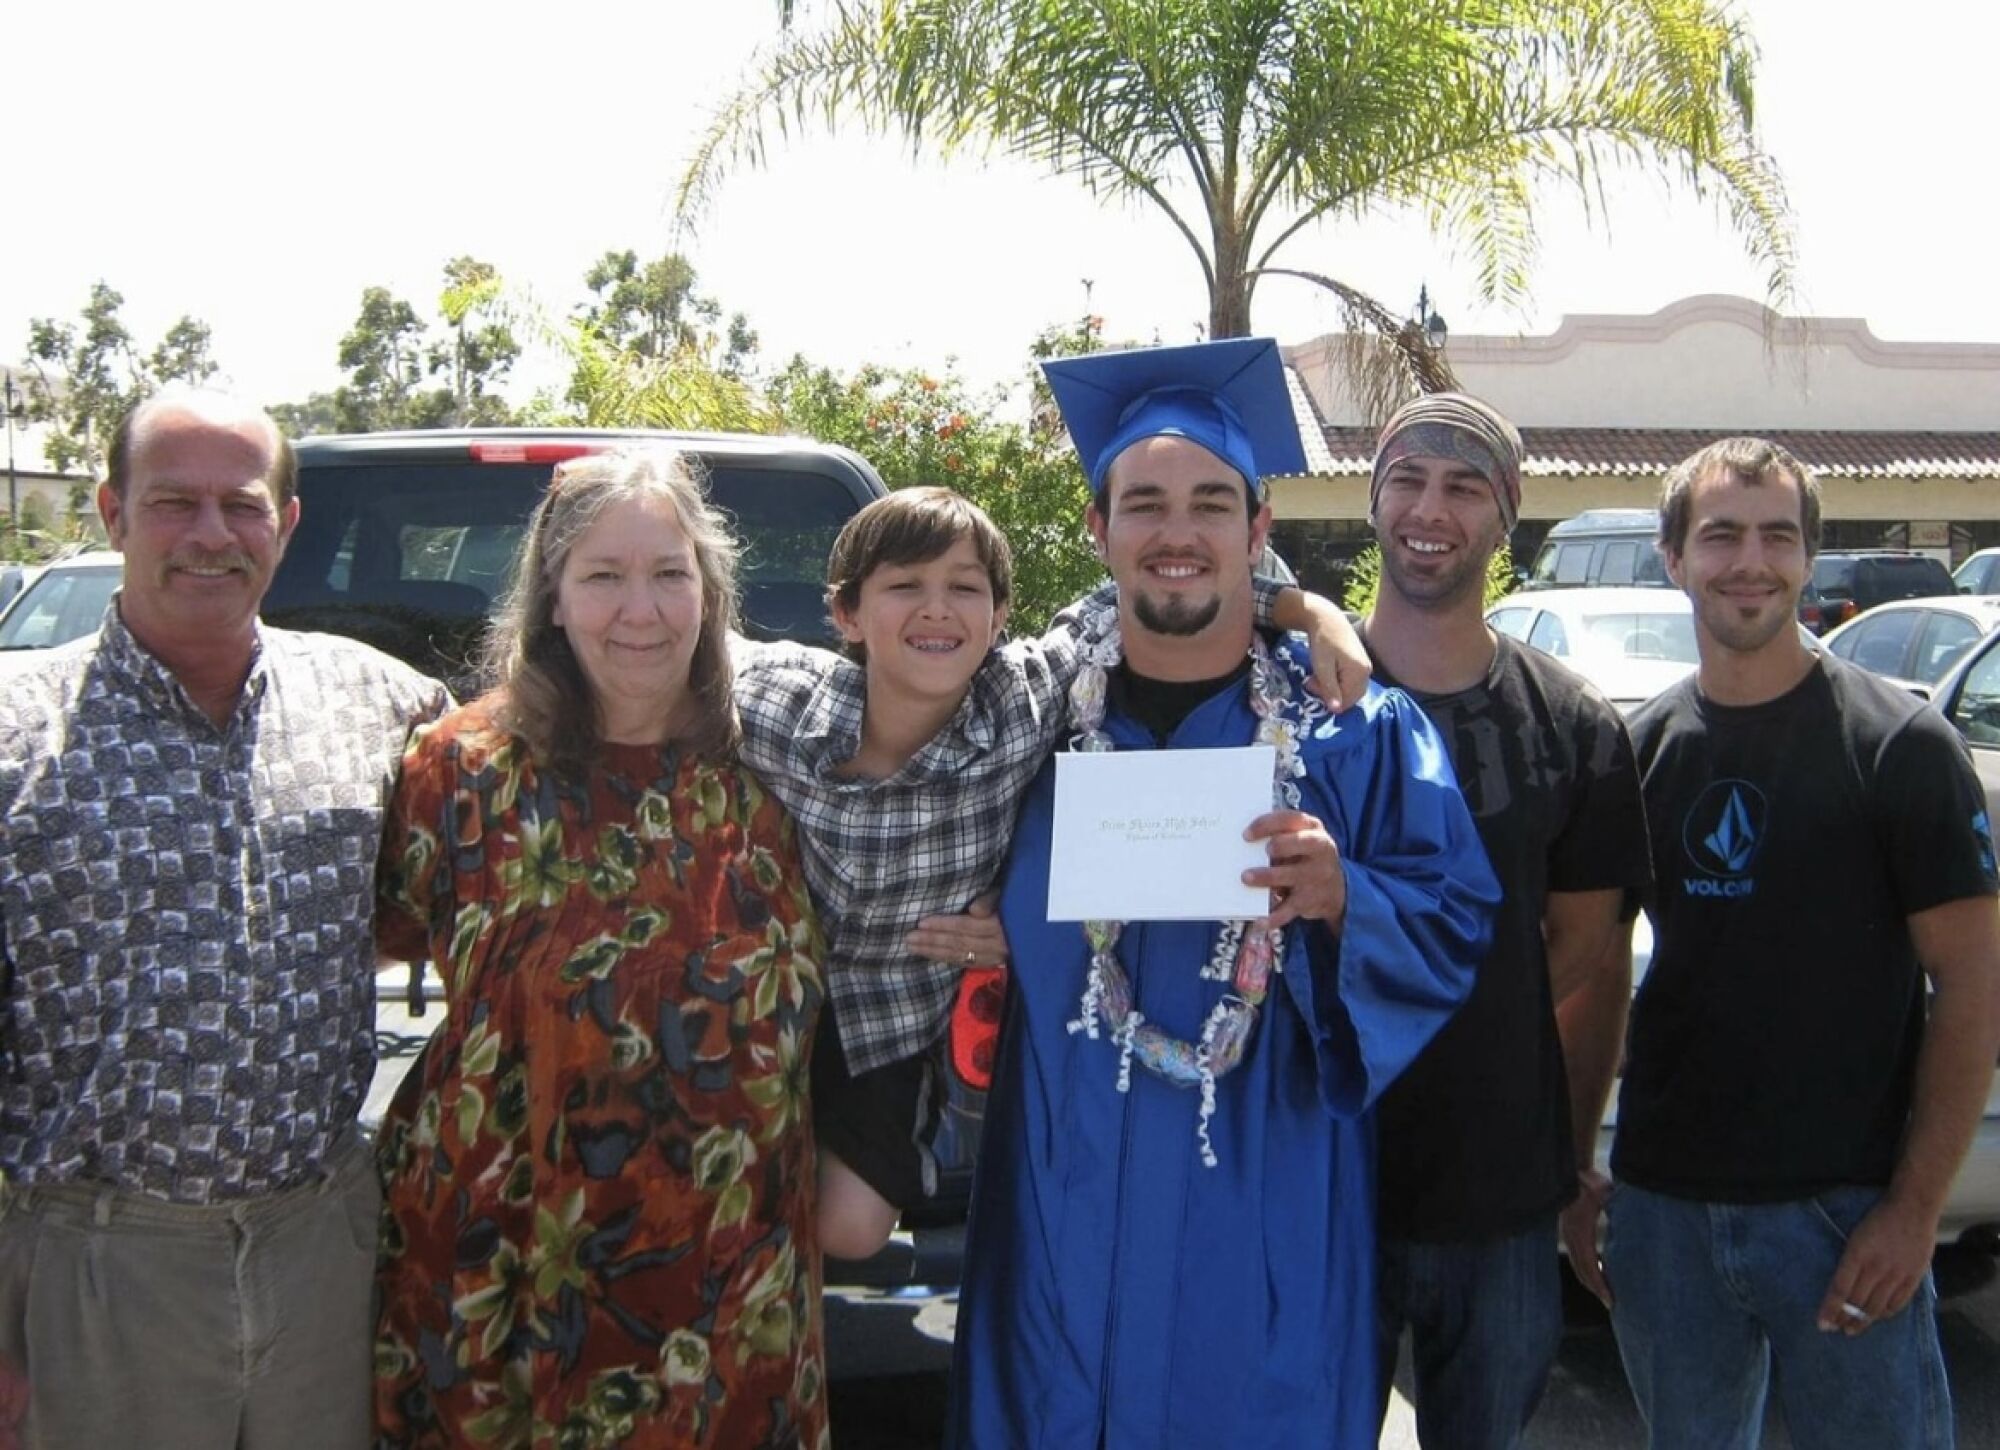 In this photo from 2011, Joseph Reinig holds his diploma after graduating from Ocean Shores High School.